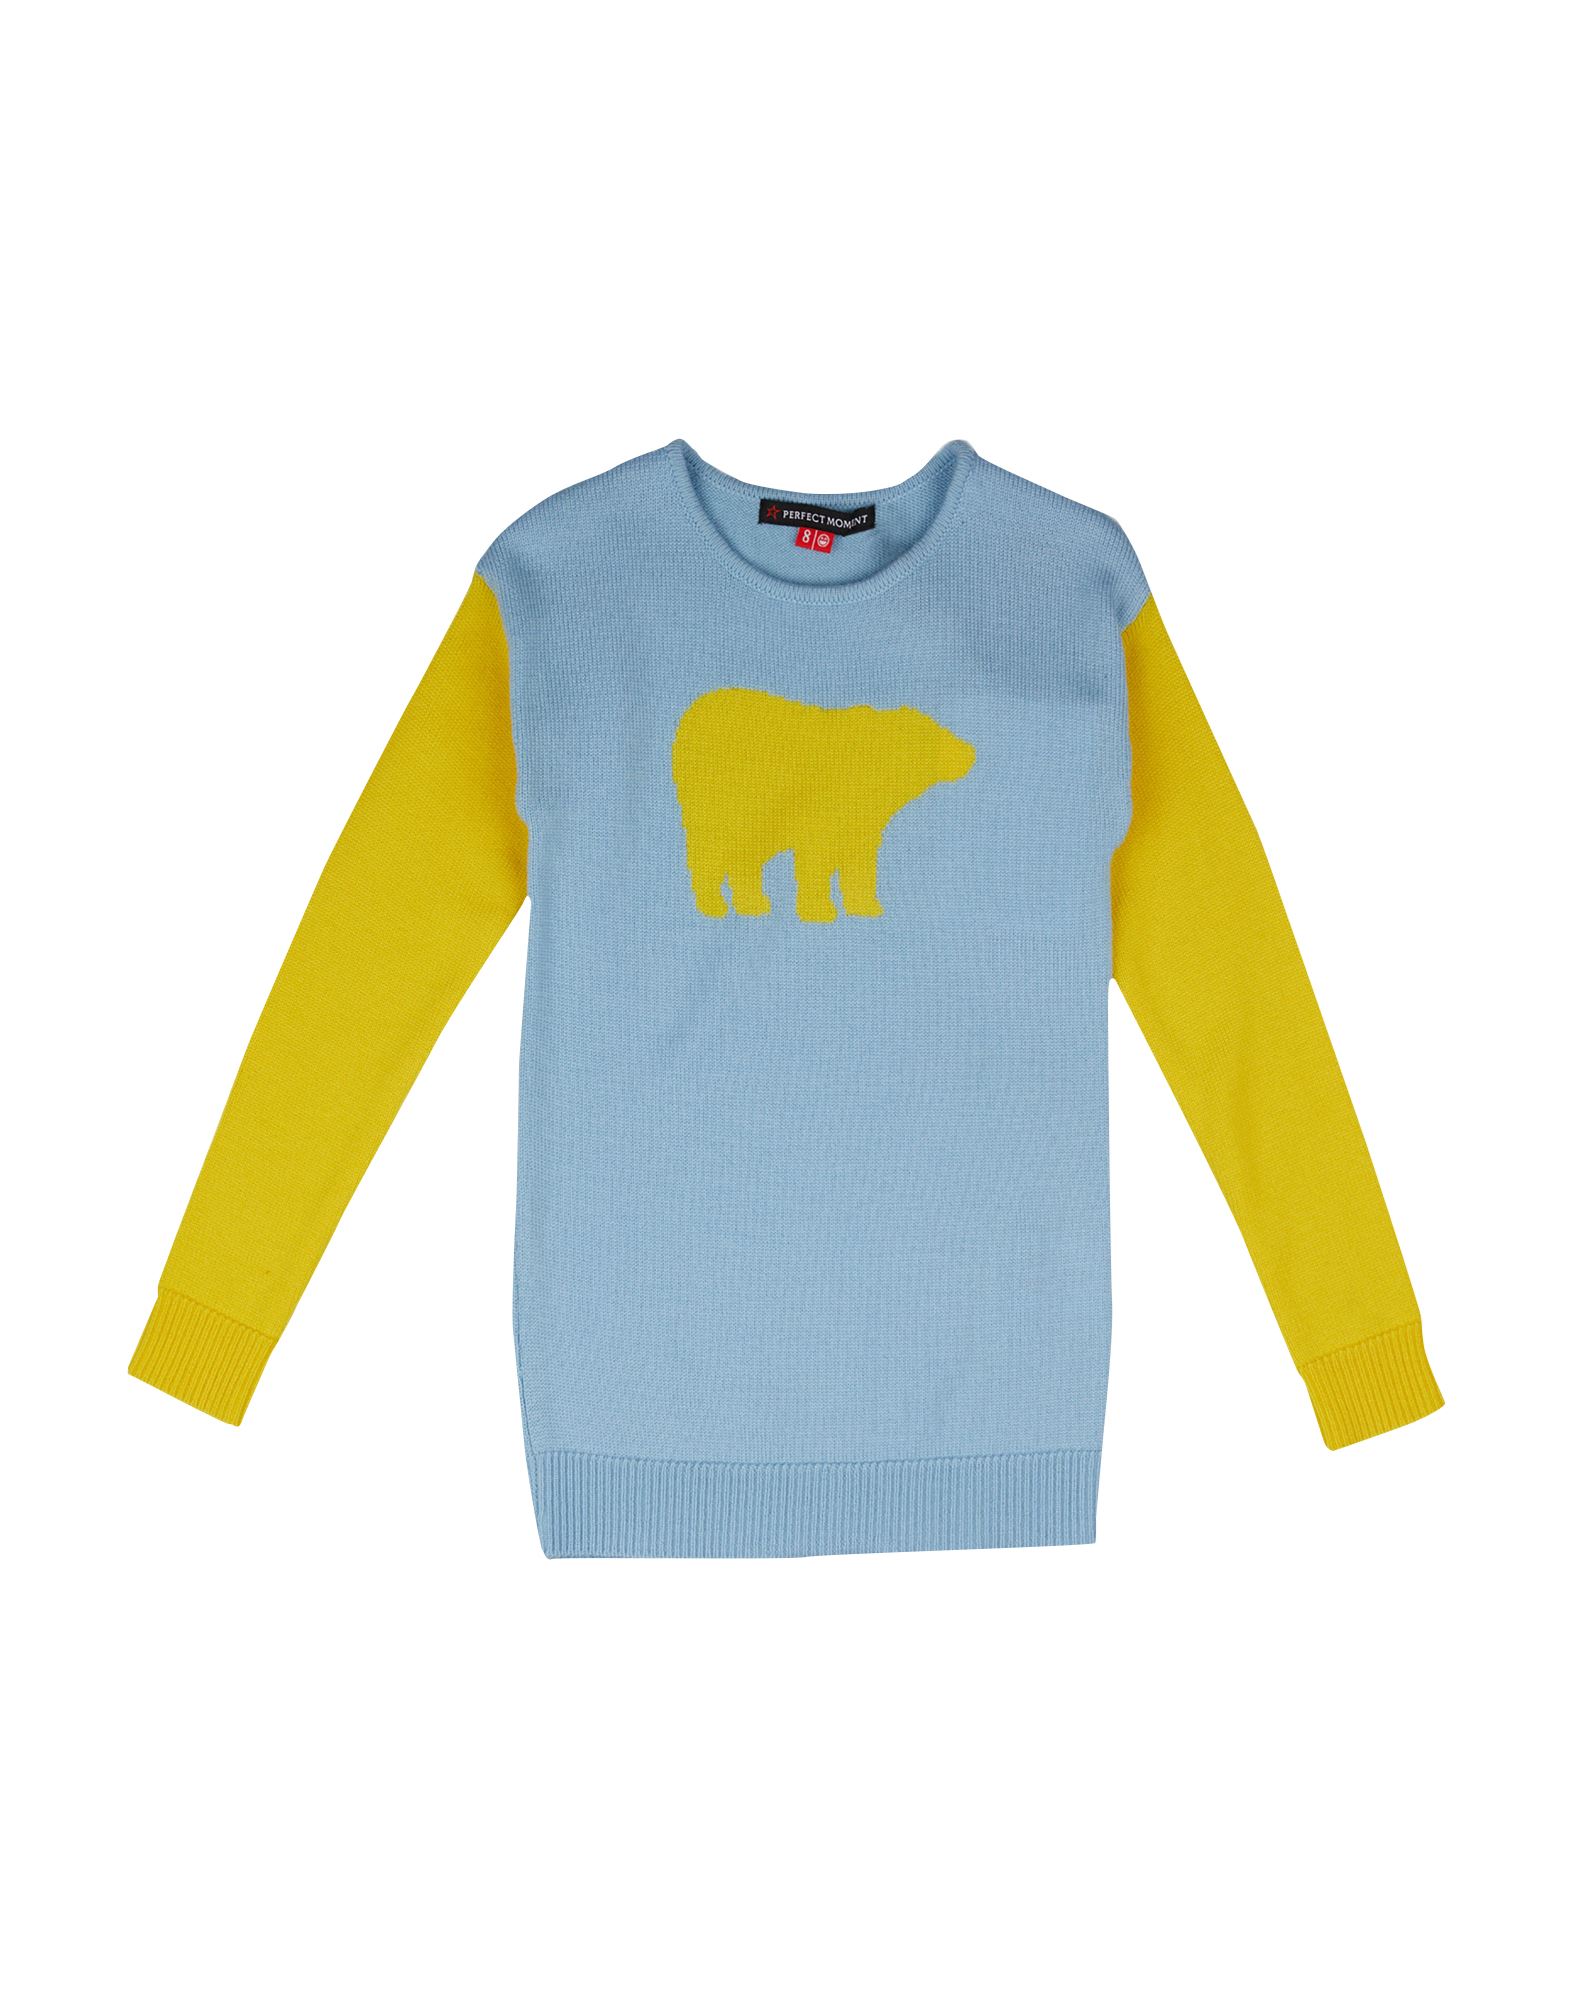 PERFECT MOMENT Pullover Kinder Himmelblau von PERFECT MOMENT